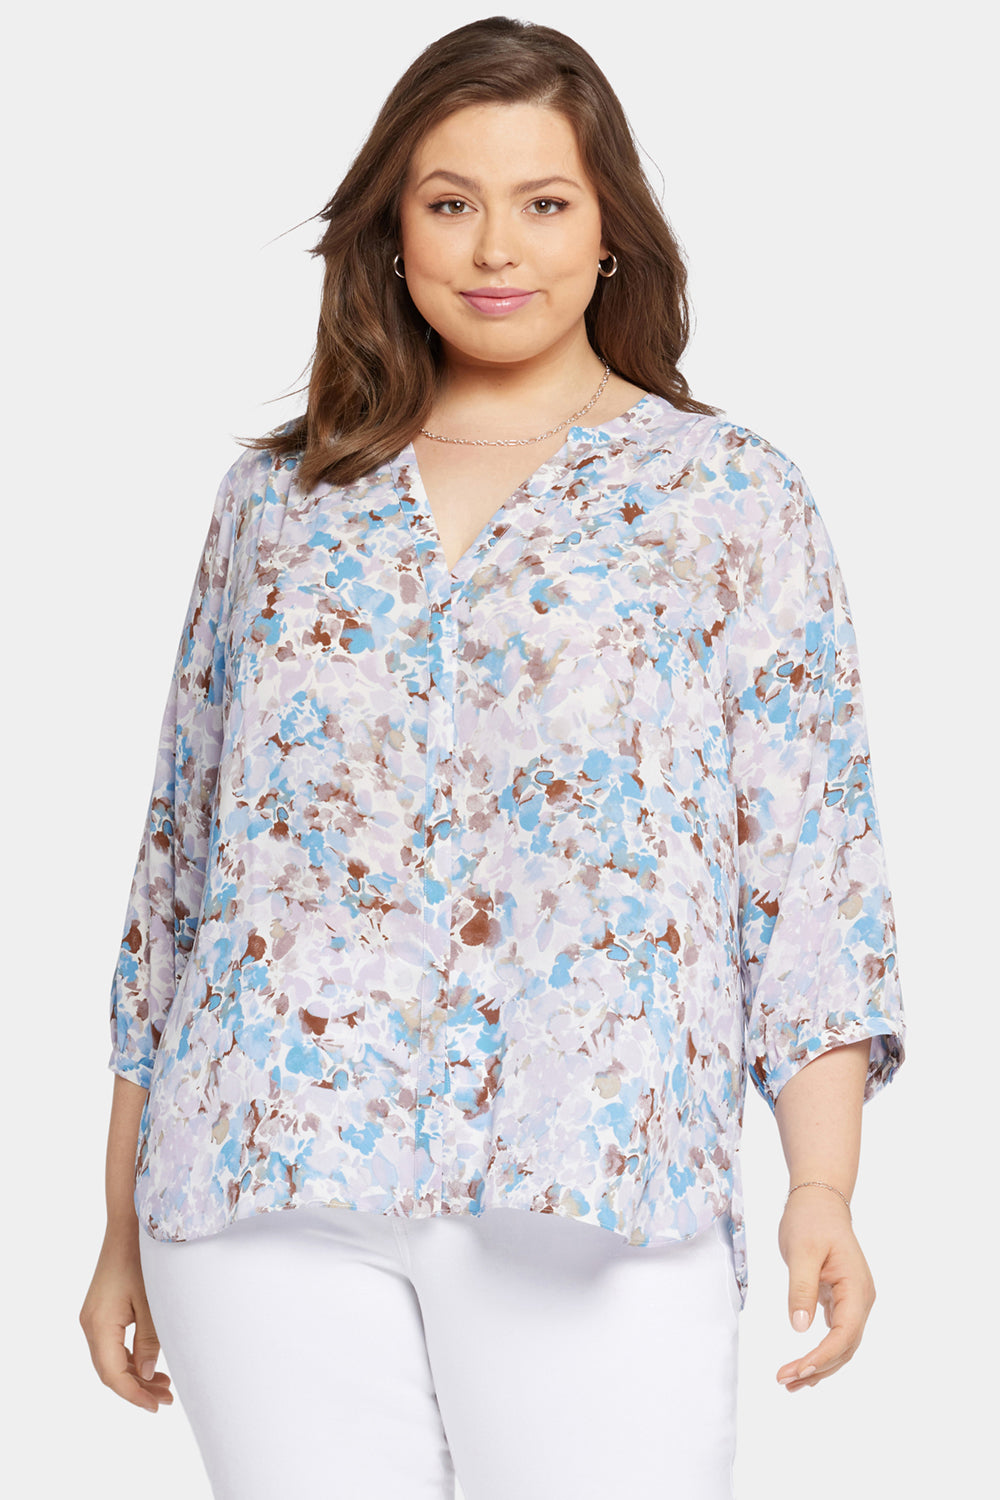 NYDJ Pintuck Blouse In Plus Size  - Becca Bouquet